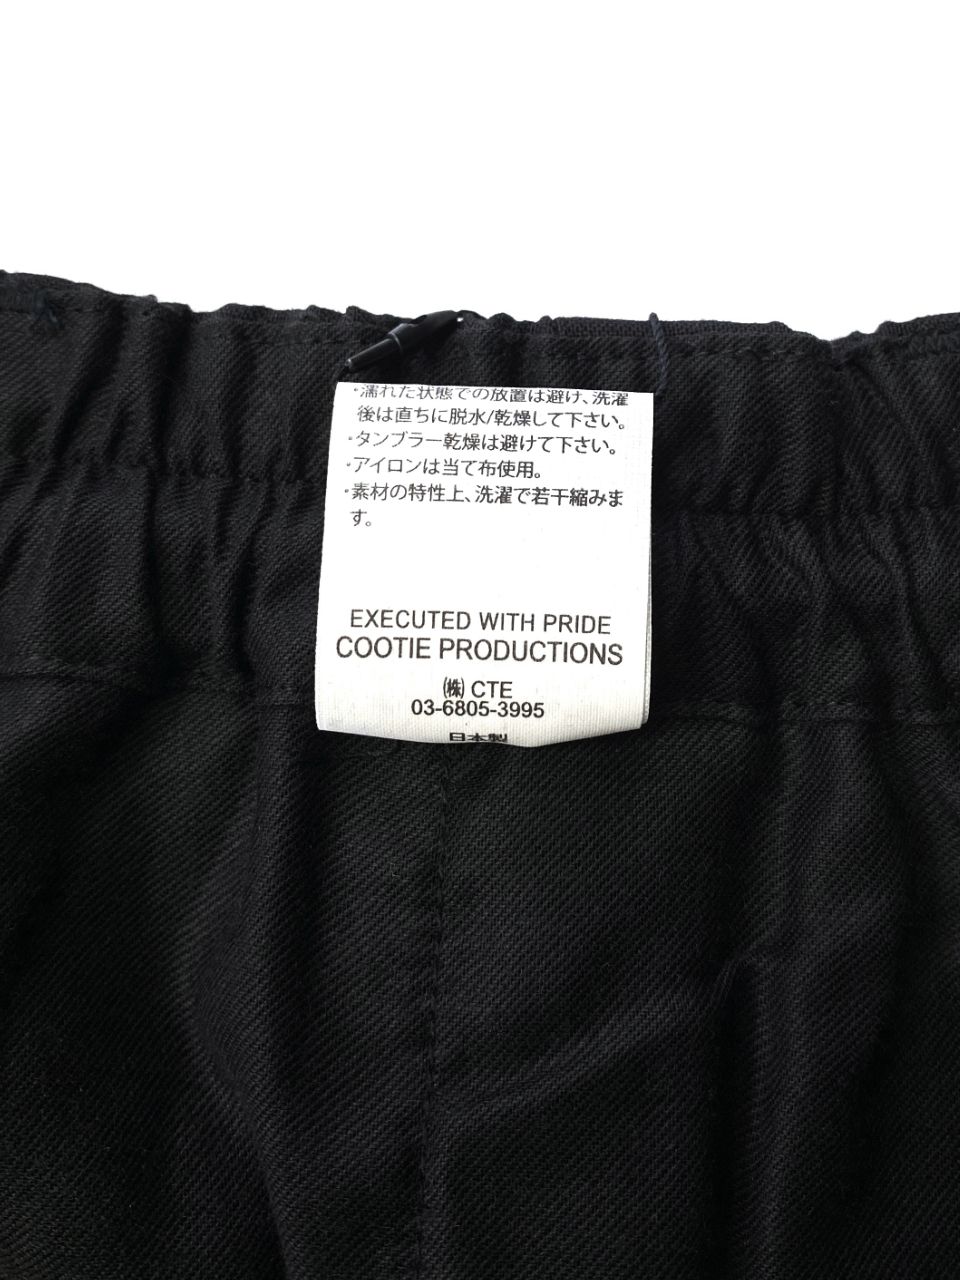 COOTIE PRODUCTIONS - T/W 2 TUCK EASY PANTS (BLACK) / ポリウール 